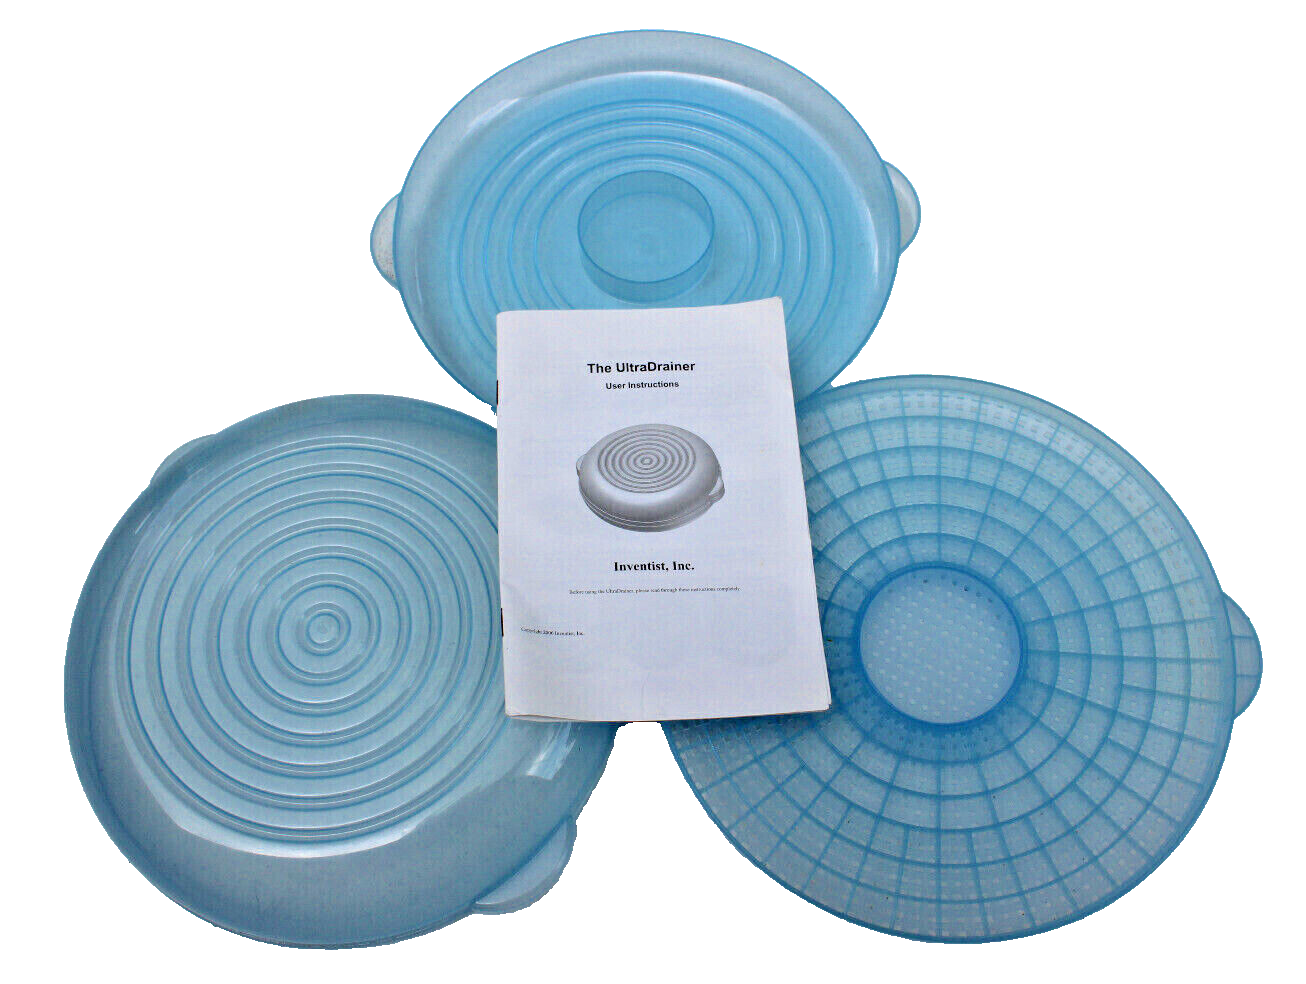 Primary image for THE ULTRA DRAINER 11” MULTIPLE USE DRAINER SERVING TRAY INVENTIST BLUE COMPLETE